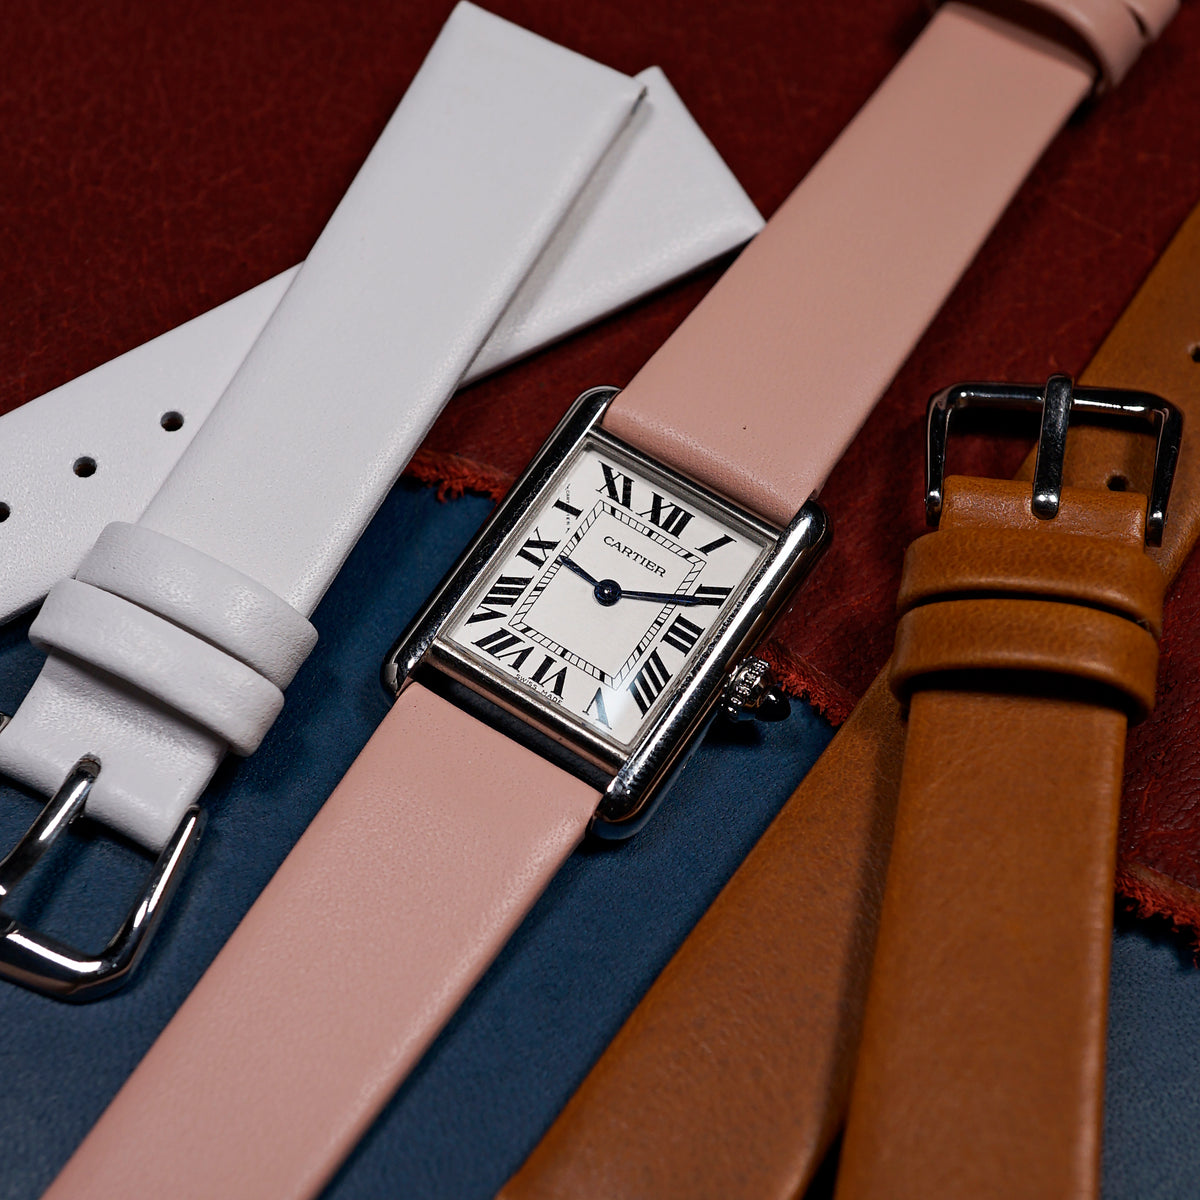 Unstitched Smooth Leather Watch Strap in Pink - Nomad Watch Works SG